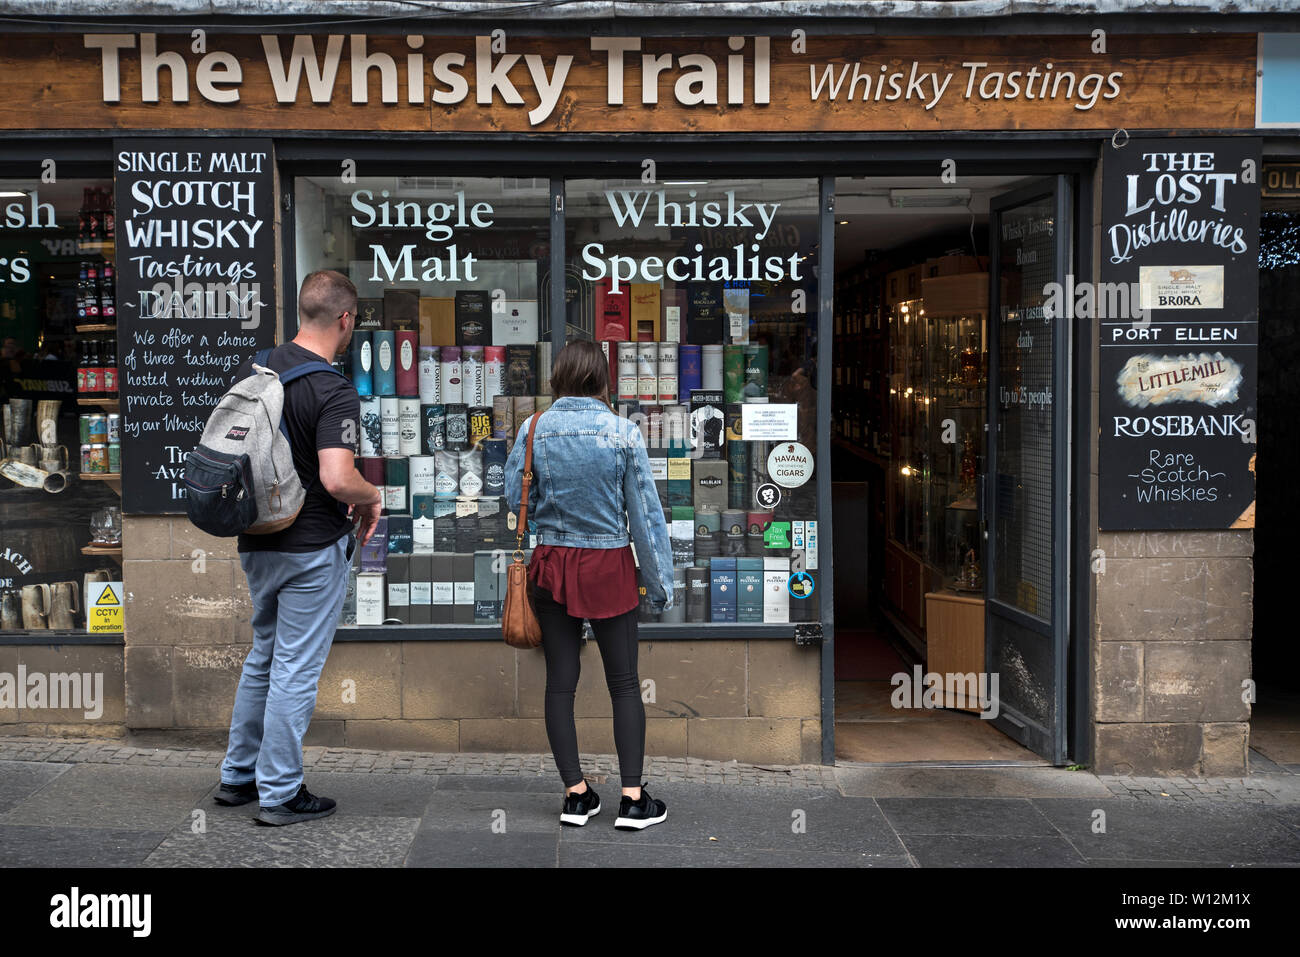 A young couple look into the window of The Whisky Trail shop on the High Street, Edinburgh, Scotland, UK. Stock Photo